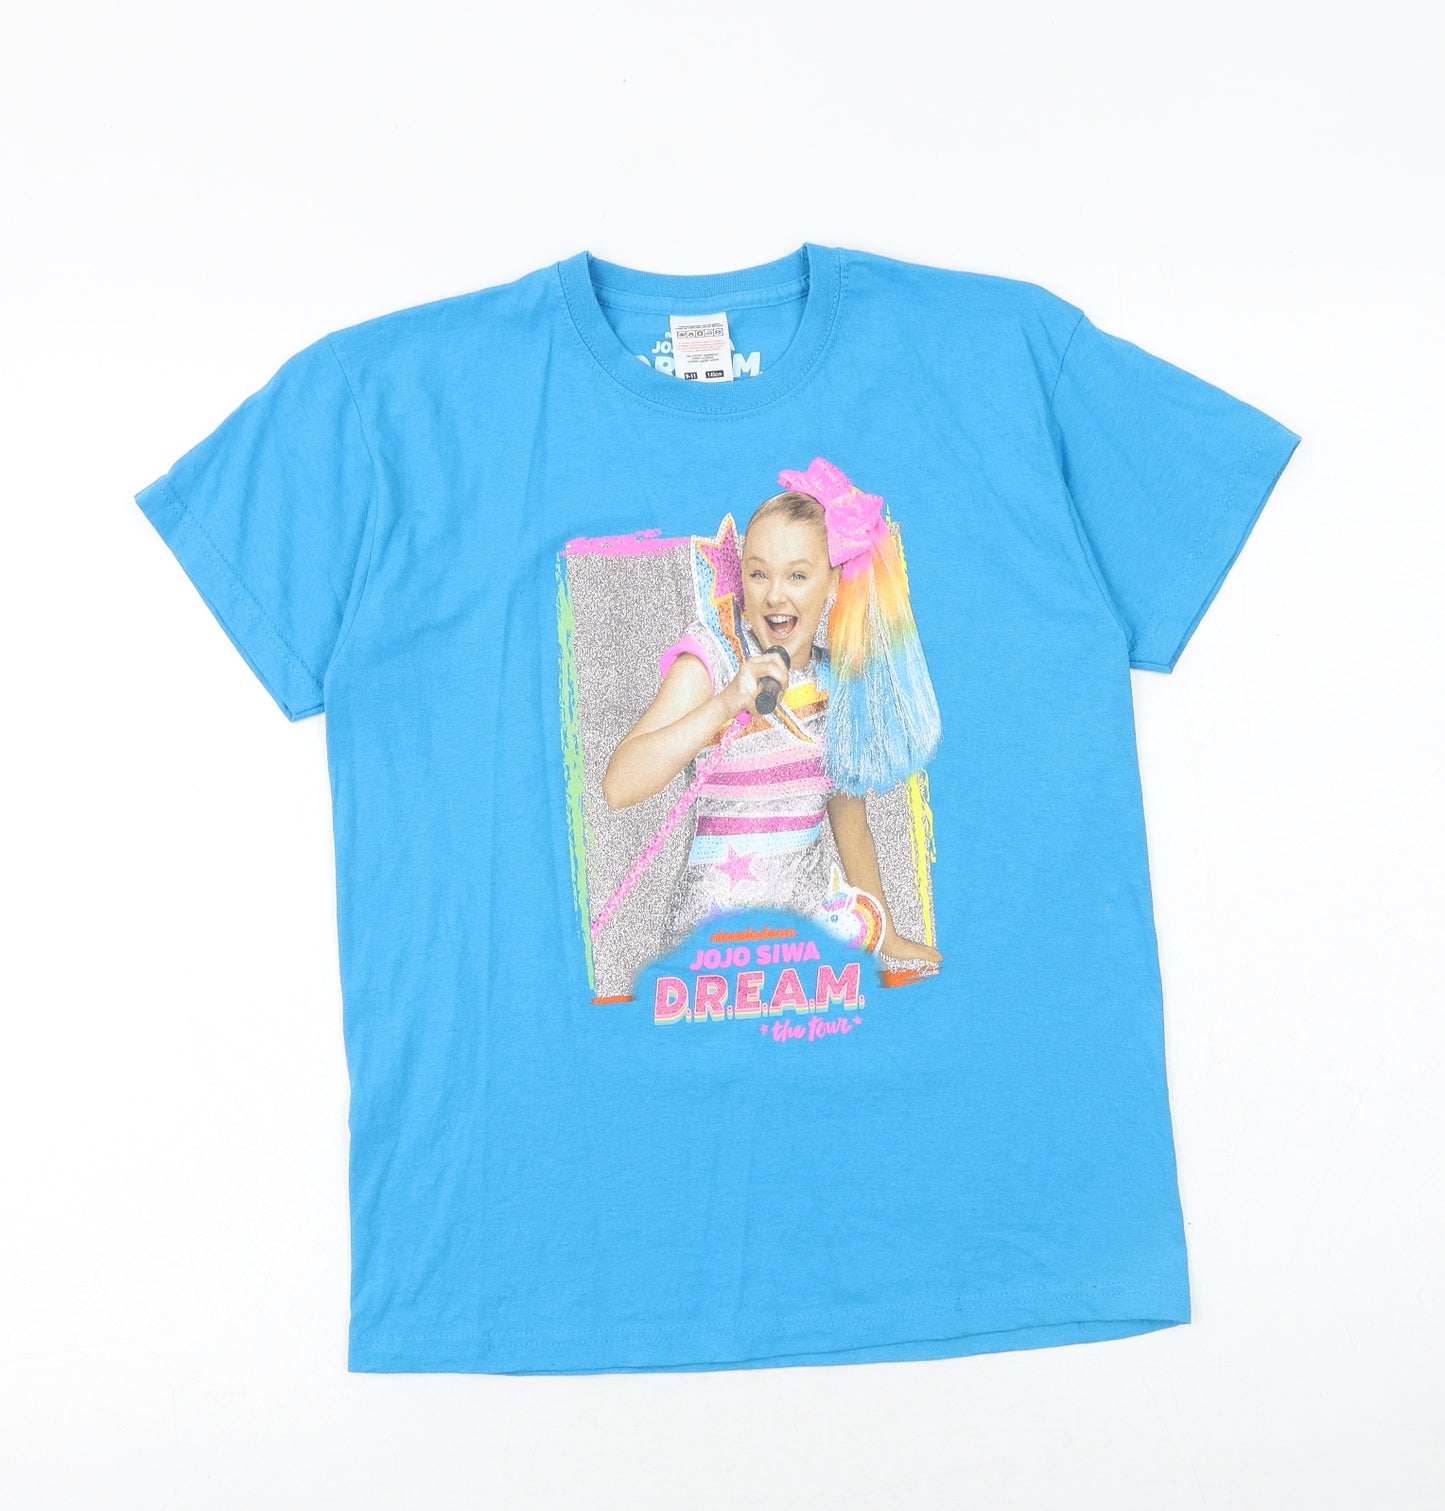 Nickelodeon Girls Blue Polyester Basic T-Shirt Size 10-11 Years Round Neck Pullover - Jojo Siwa D.R.E.A.M Tour